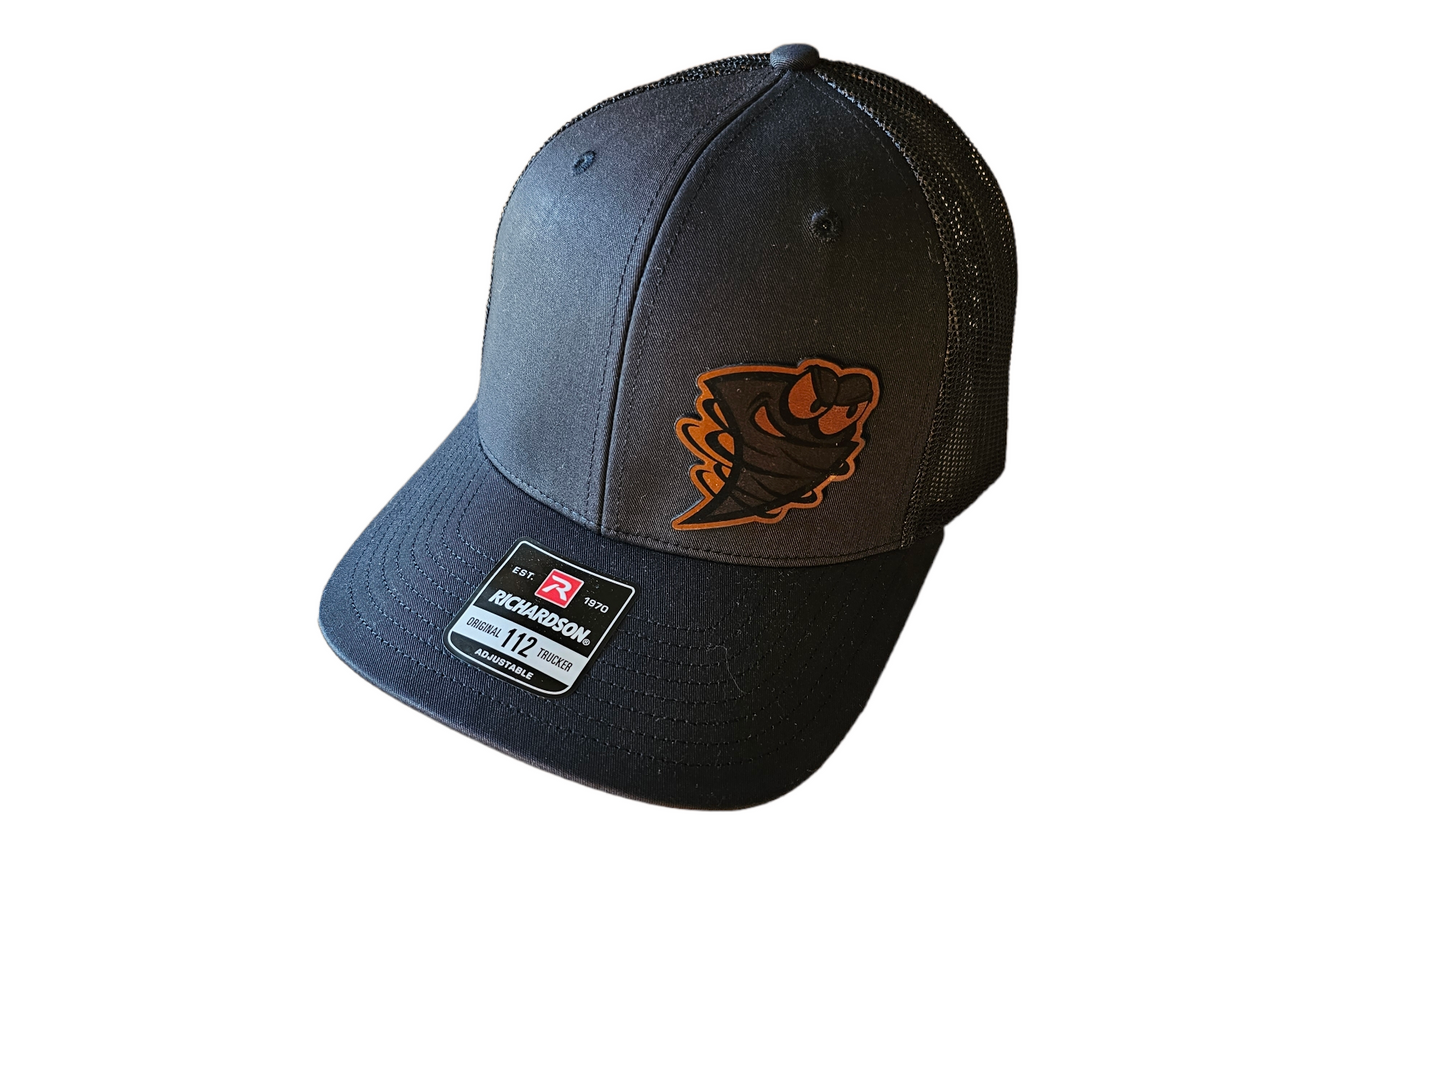 Lancaster Gales Leather Patch Snapback Hat (Black, Camo, Pink)